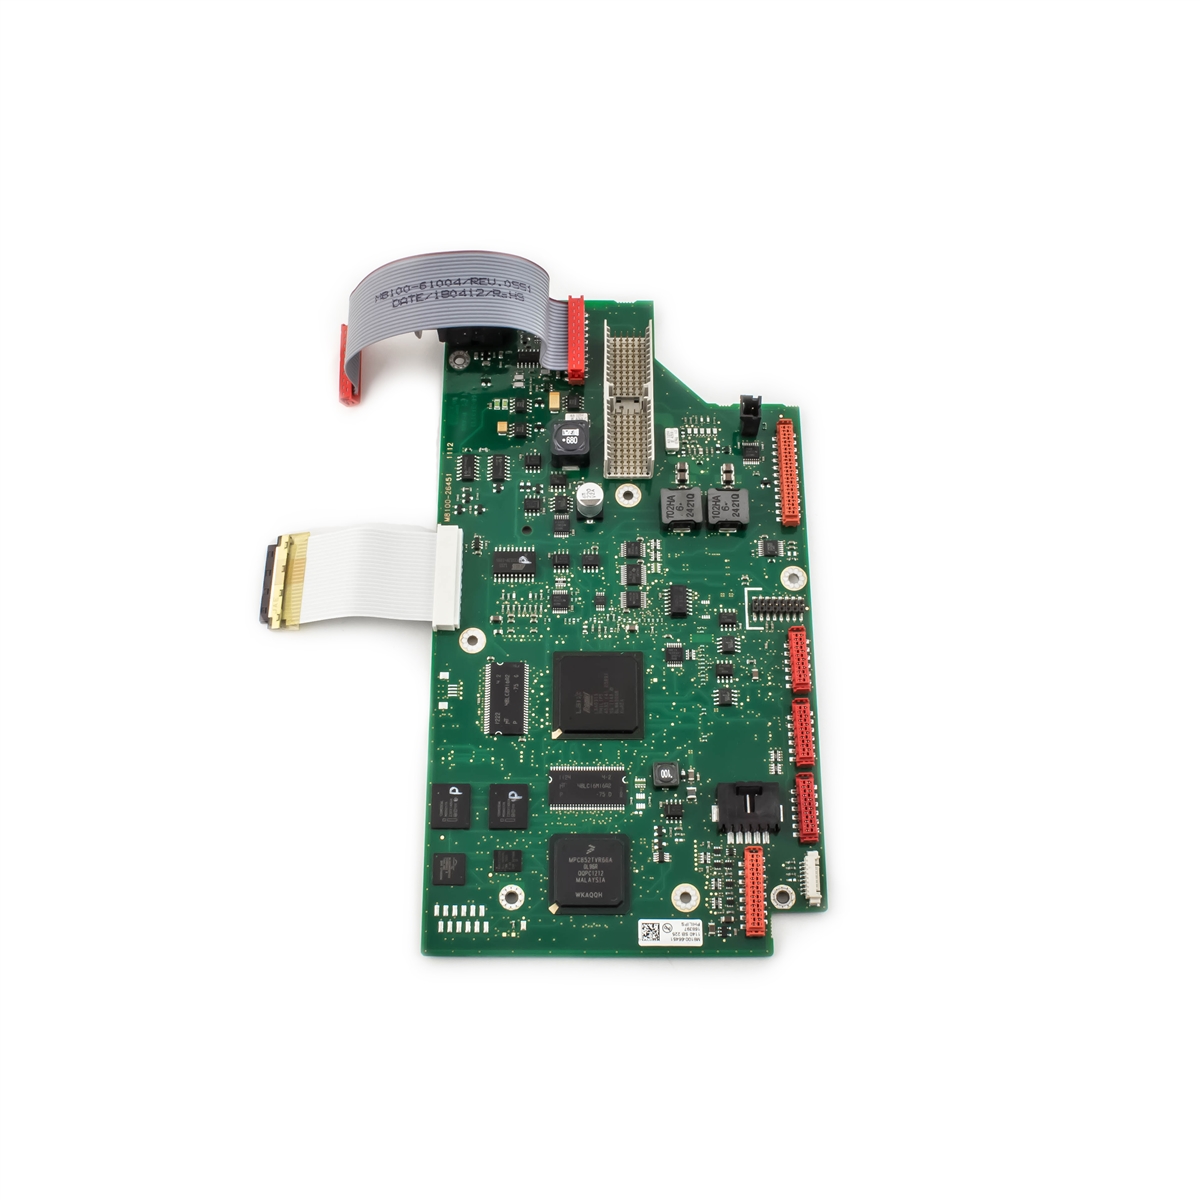 Philips IntelliVue MP5 Patient Monitor Main Circuit Board